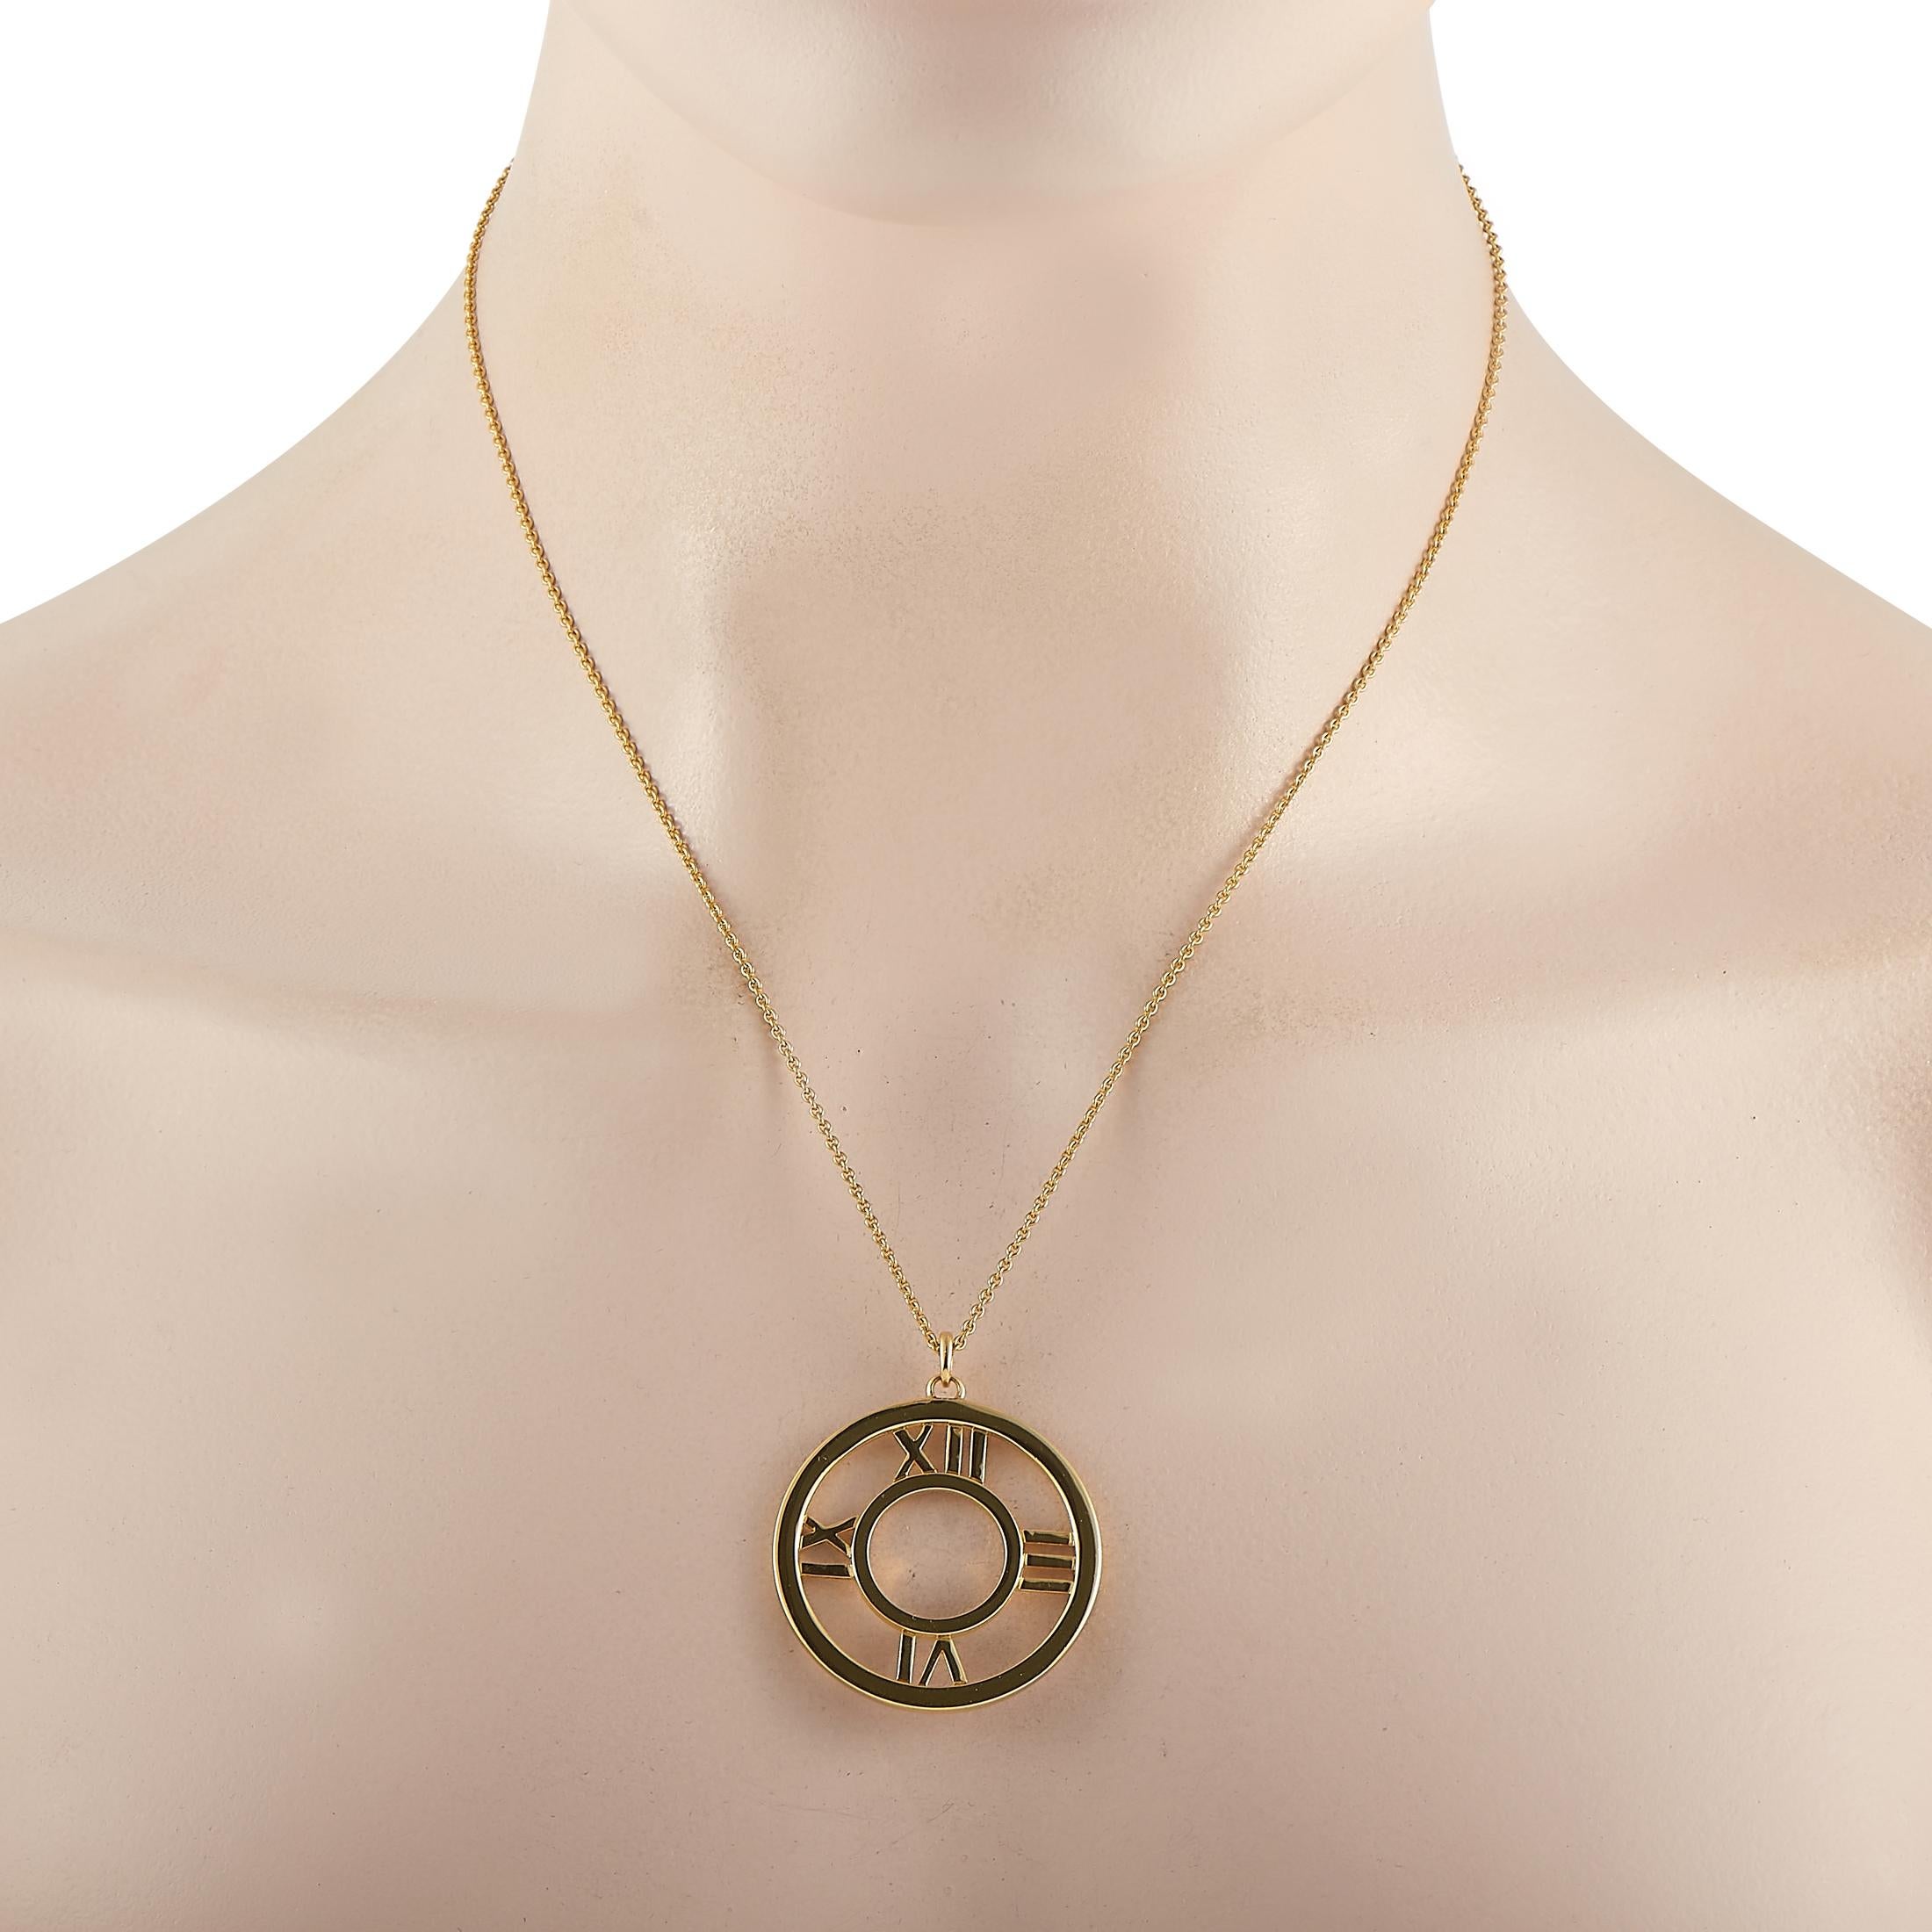 From Tiffany & Co. Atlas Collection, this circular pendant is fashioned in 18K yellow gold and is designed with a round open frame with sculpted Roman numerals. You won't go wrong with the neat silhouette, classy design, and timeless elegance of